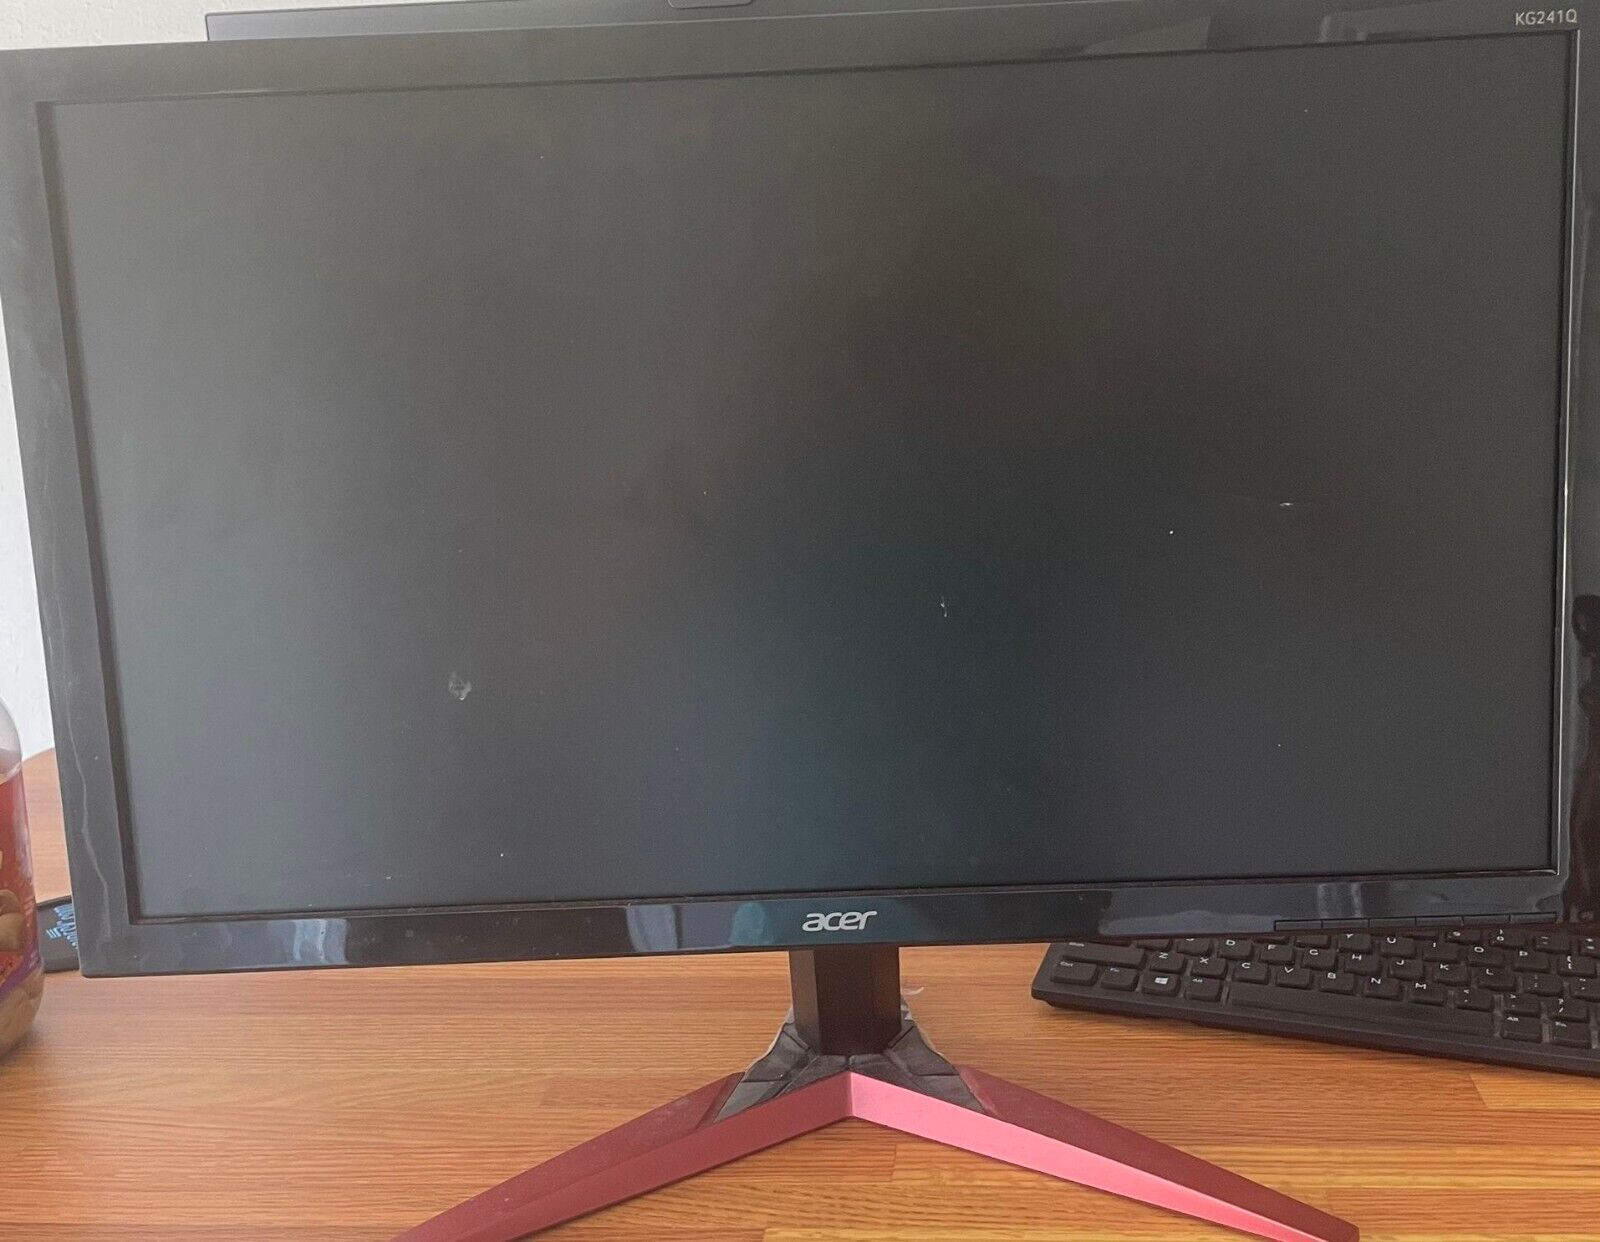 Acer KG241Q Pbiip 23.6 inch Widescreen LCD Monitor for sale online 